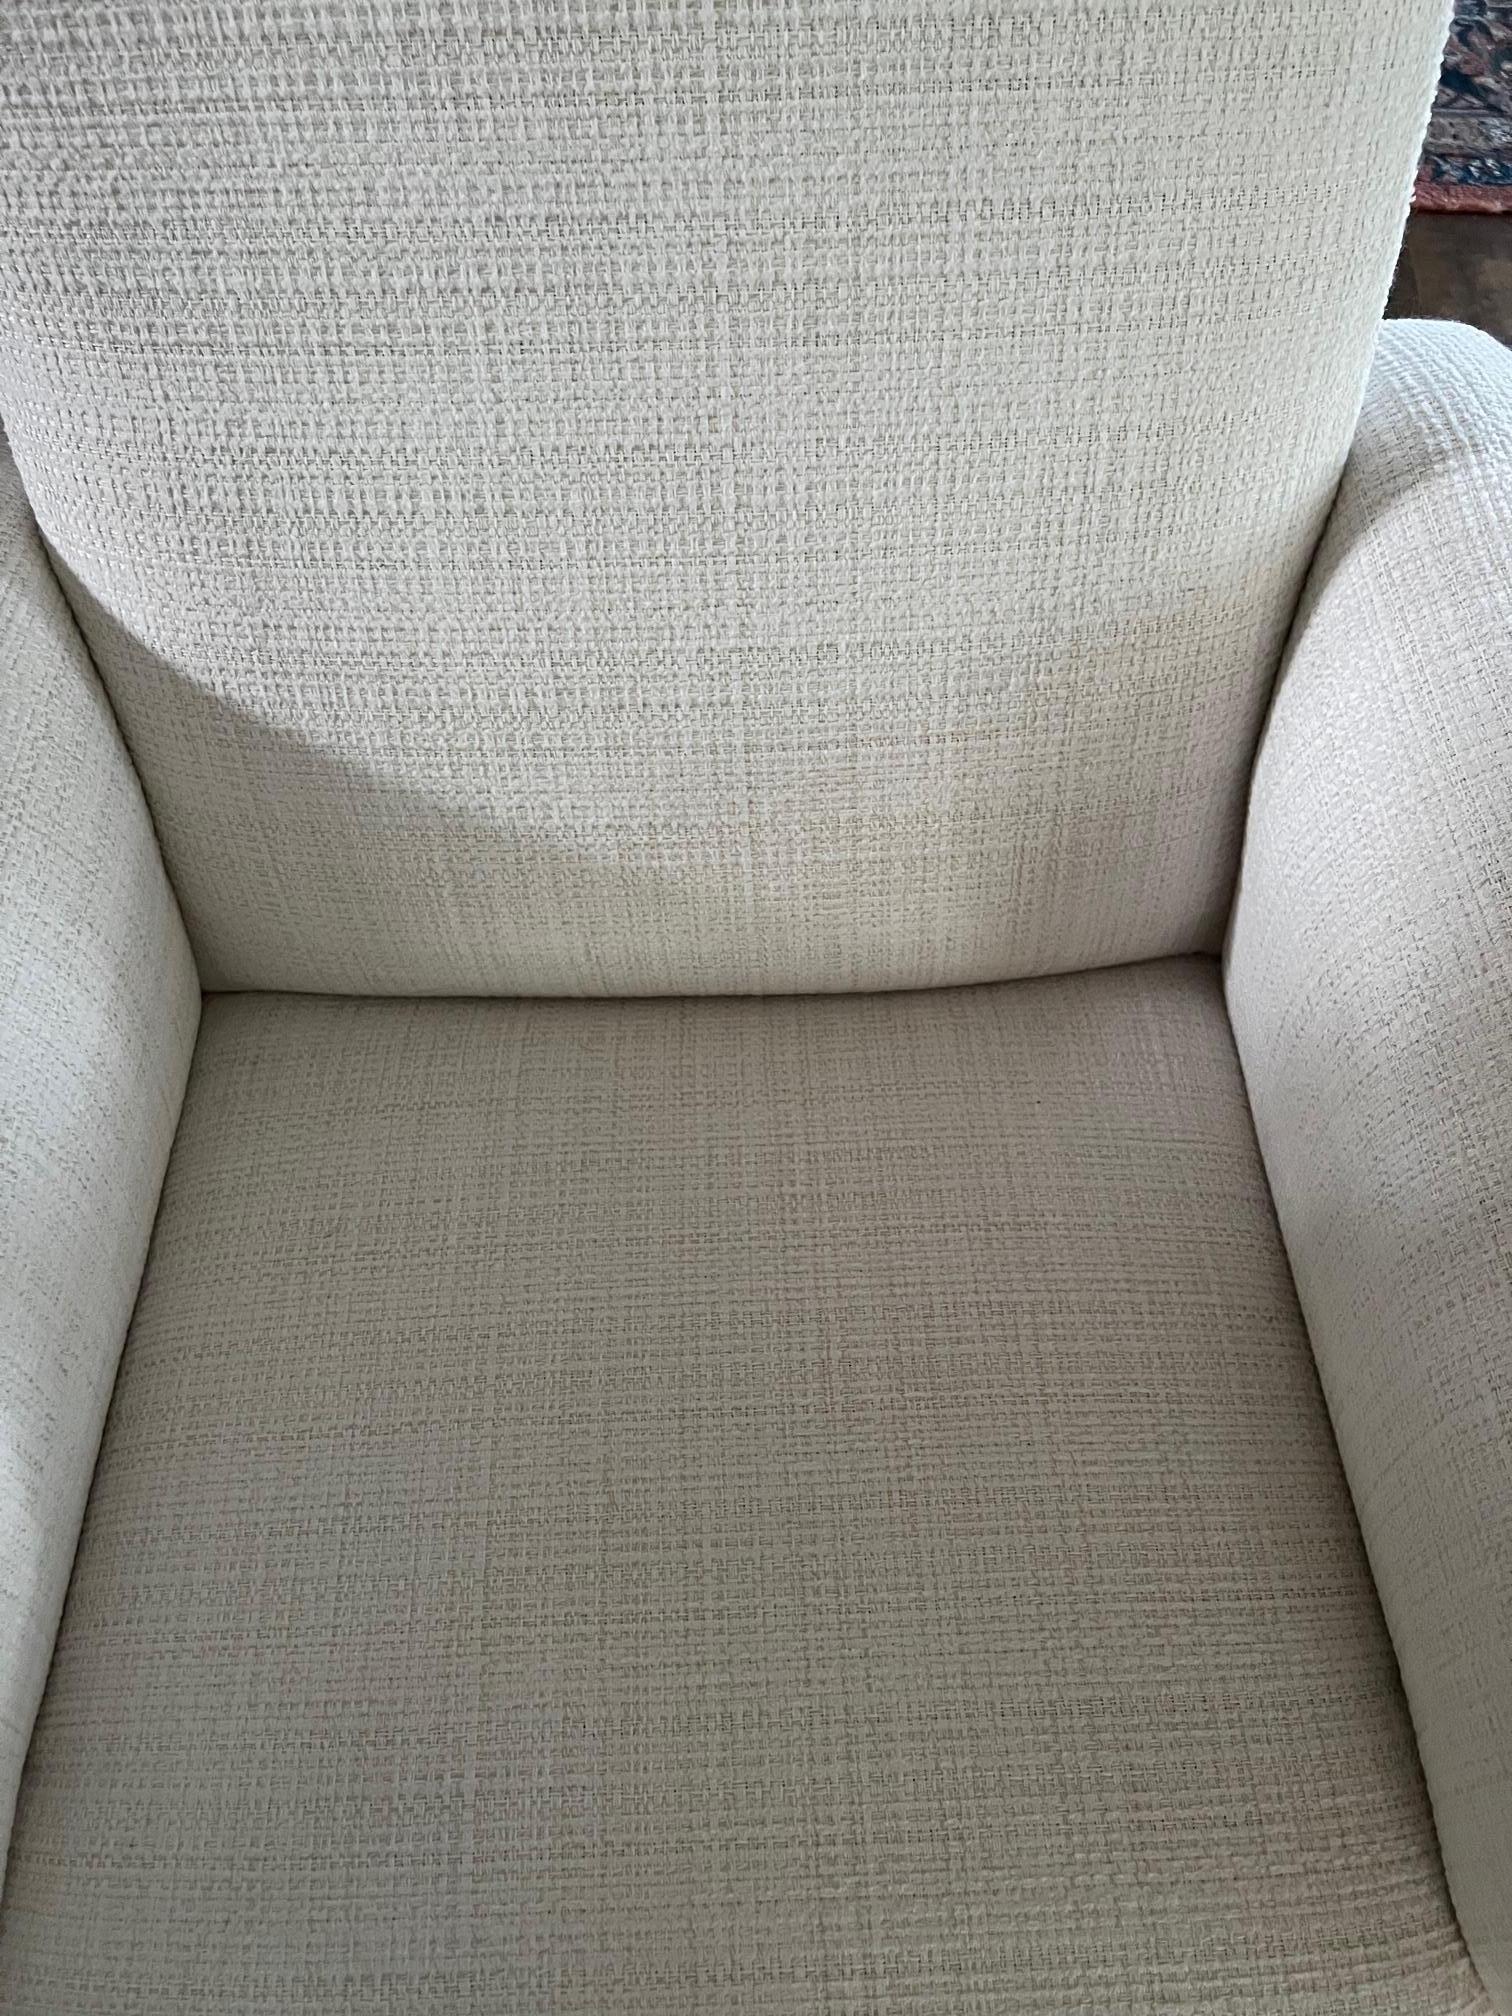 Armchairs New Cream Textured Performance Upholstery In Good Condition For Sale In New York, NY